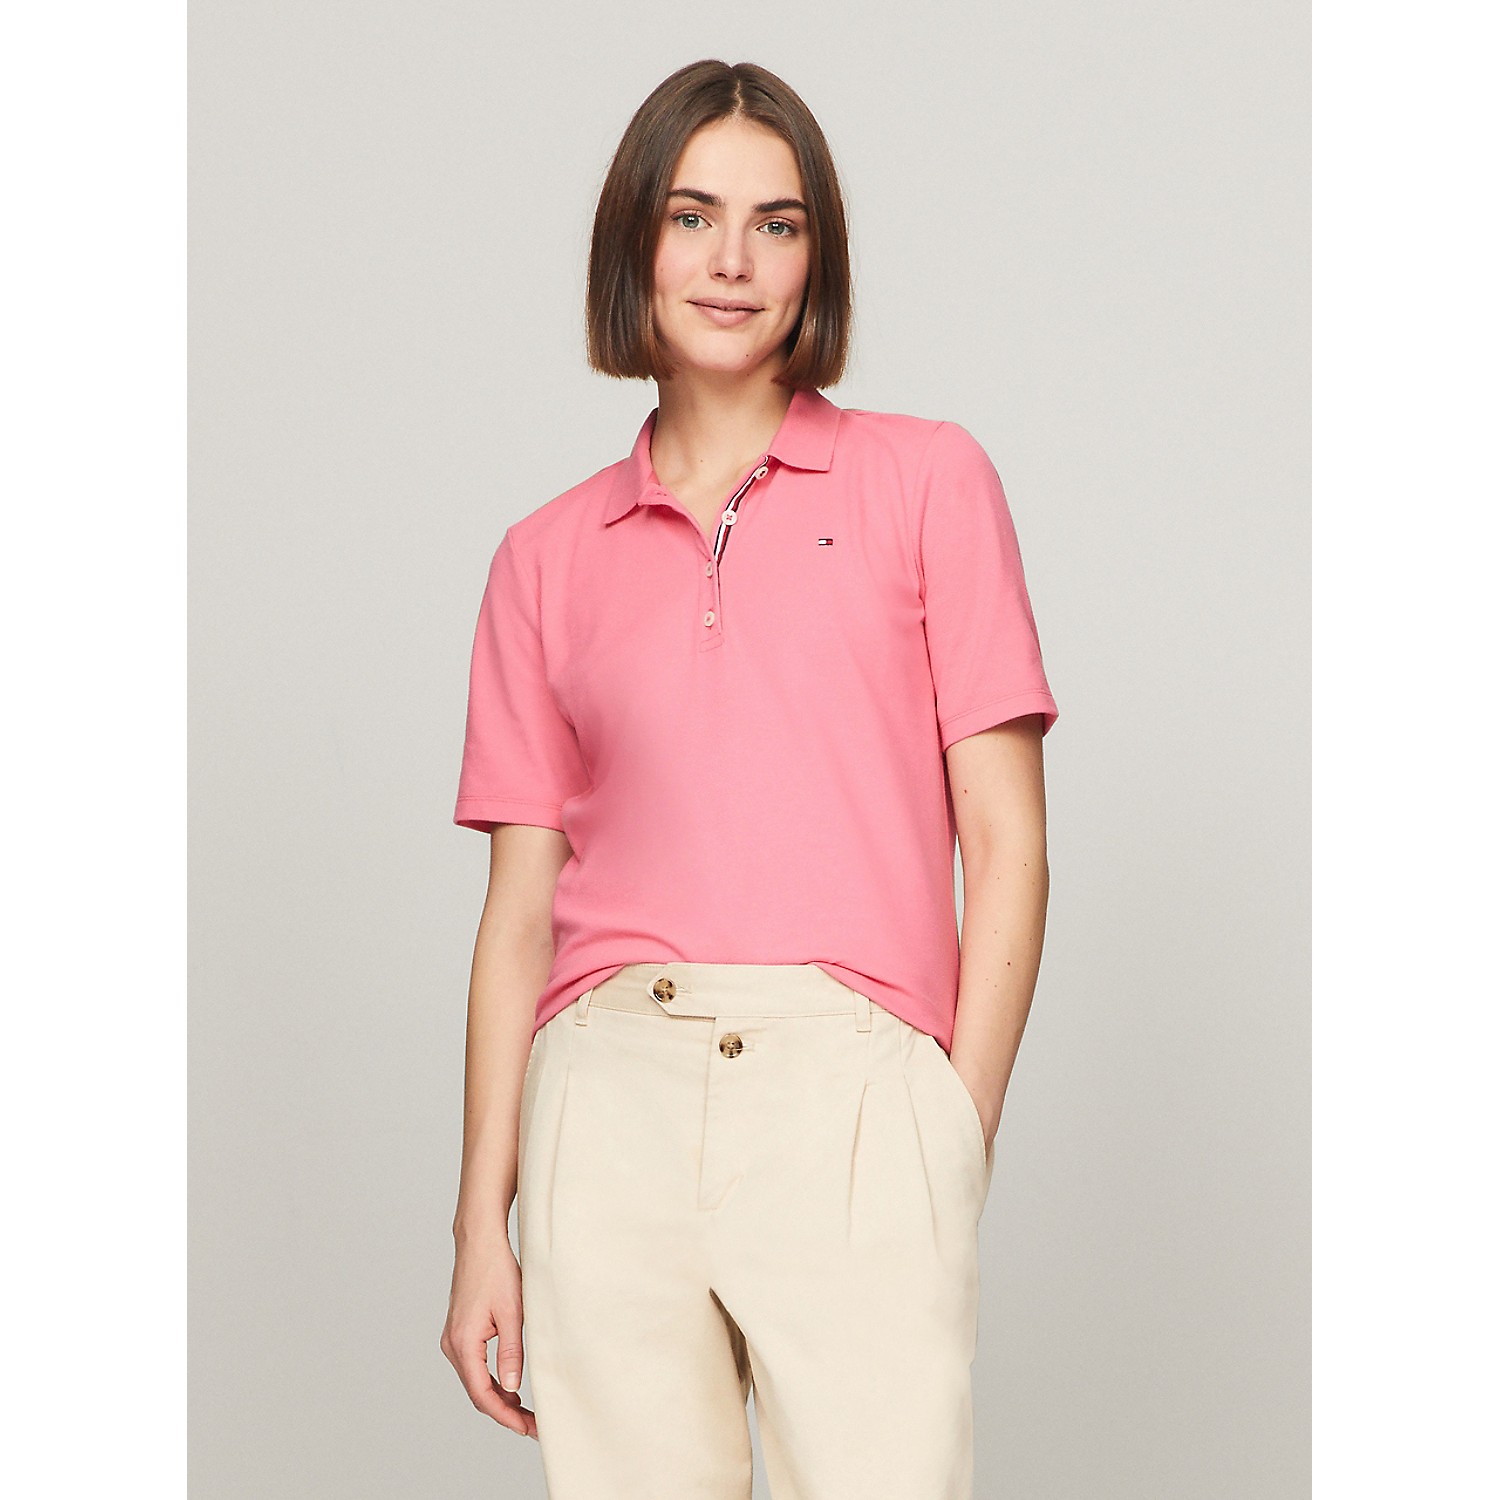 TOMMY HILFIGER Solid Stretch Cotton Polo